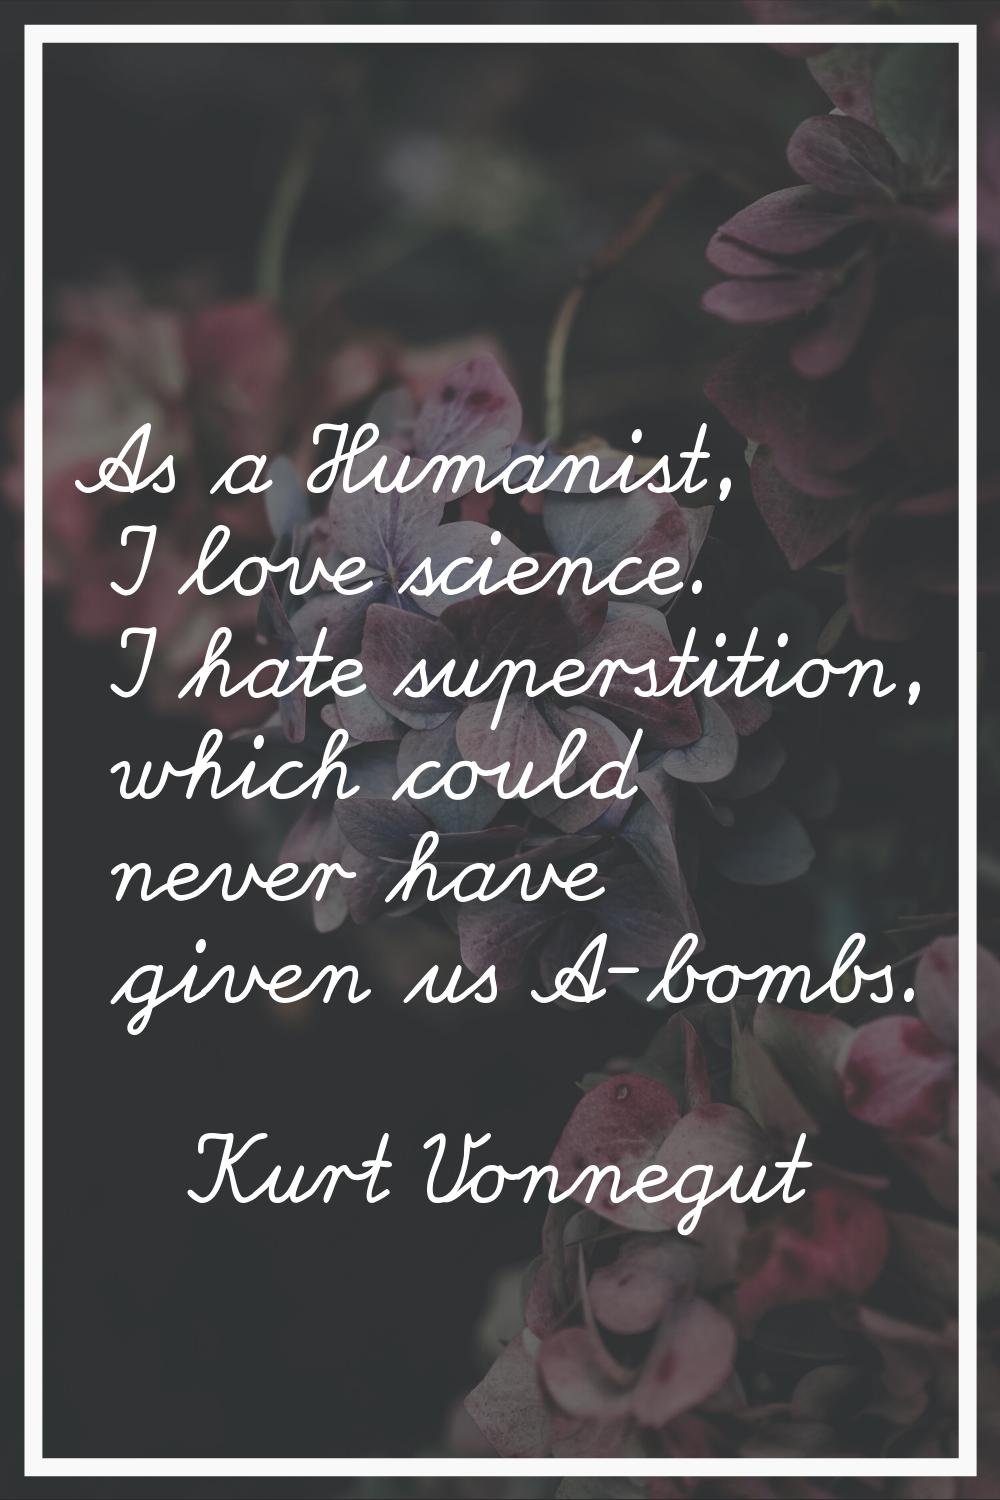 As a Humanist, I love science. I hate superstition, which could never have given us A-bombs.